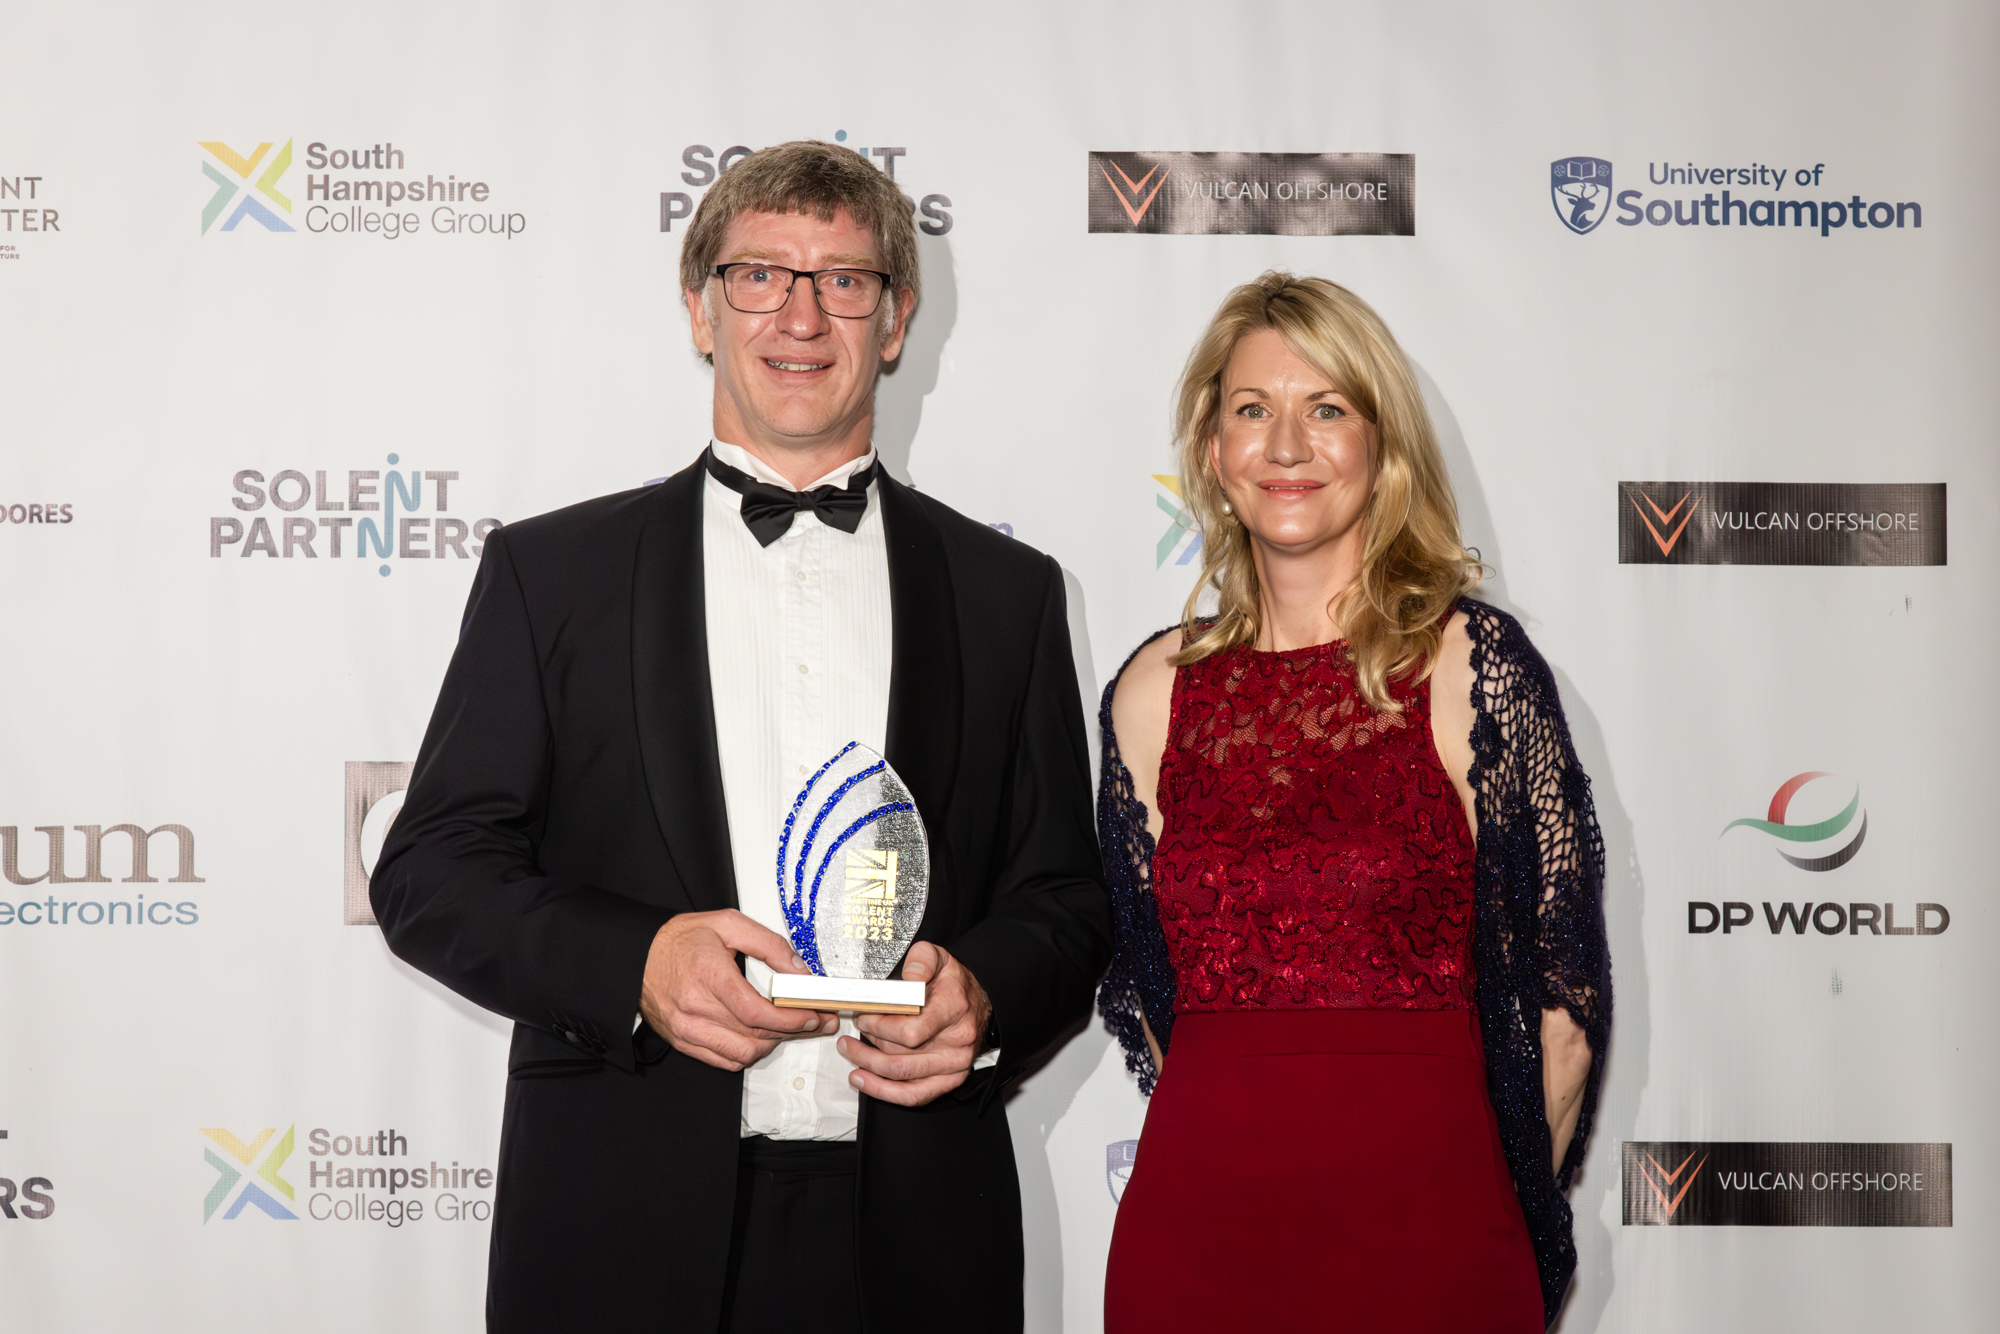 Businesses voice their pride in sponsoring Maritime UK Solent Awards